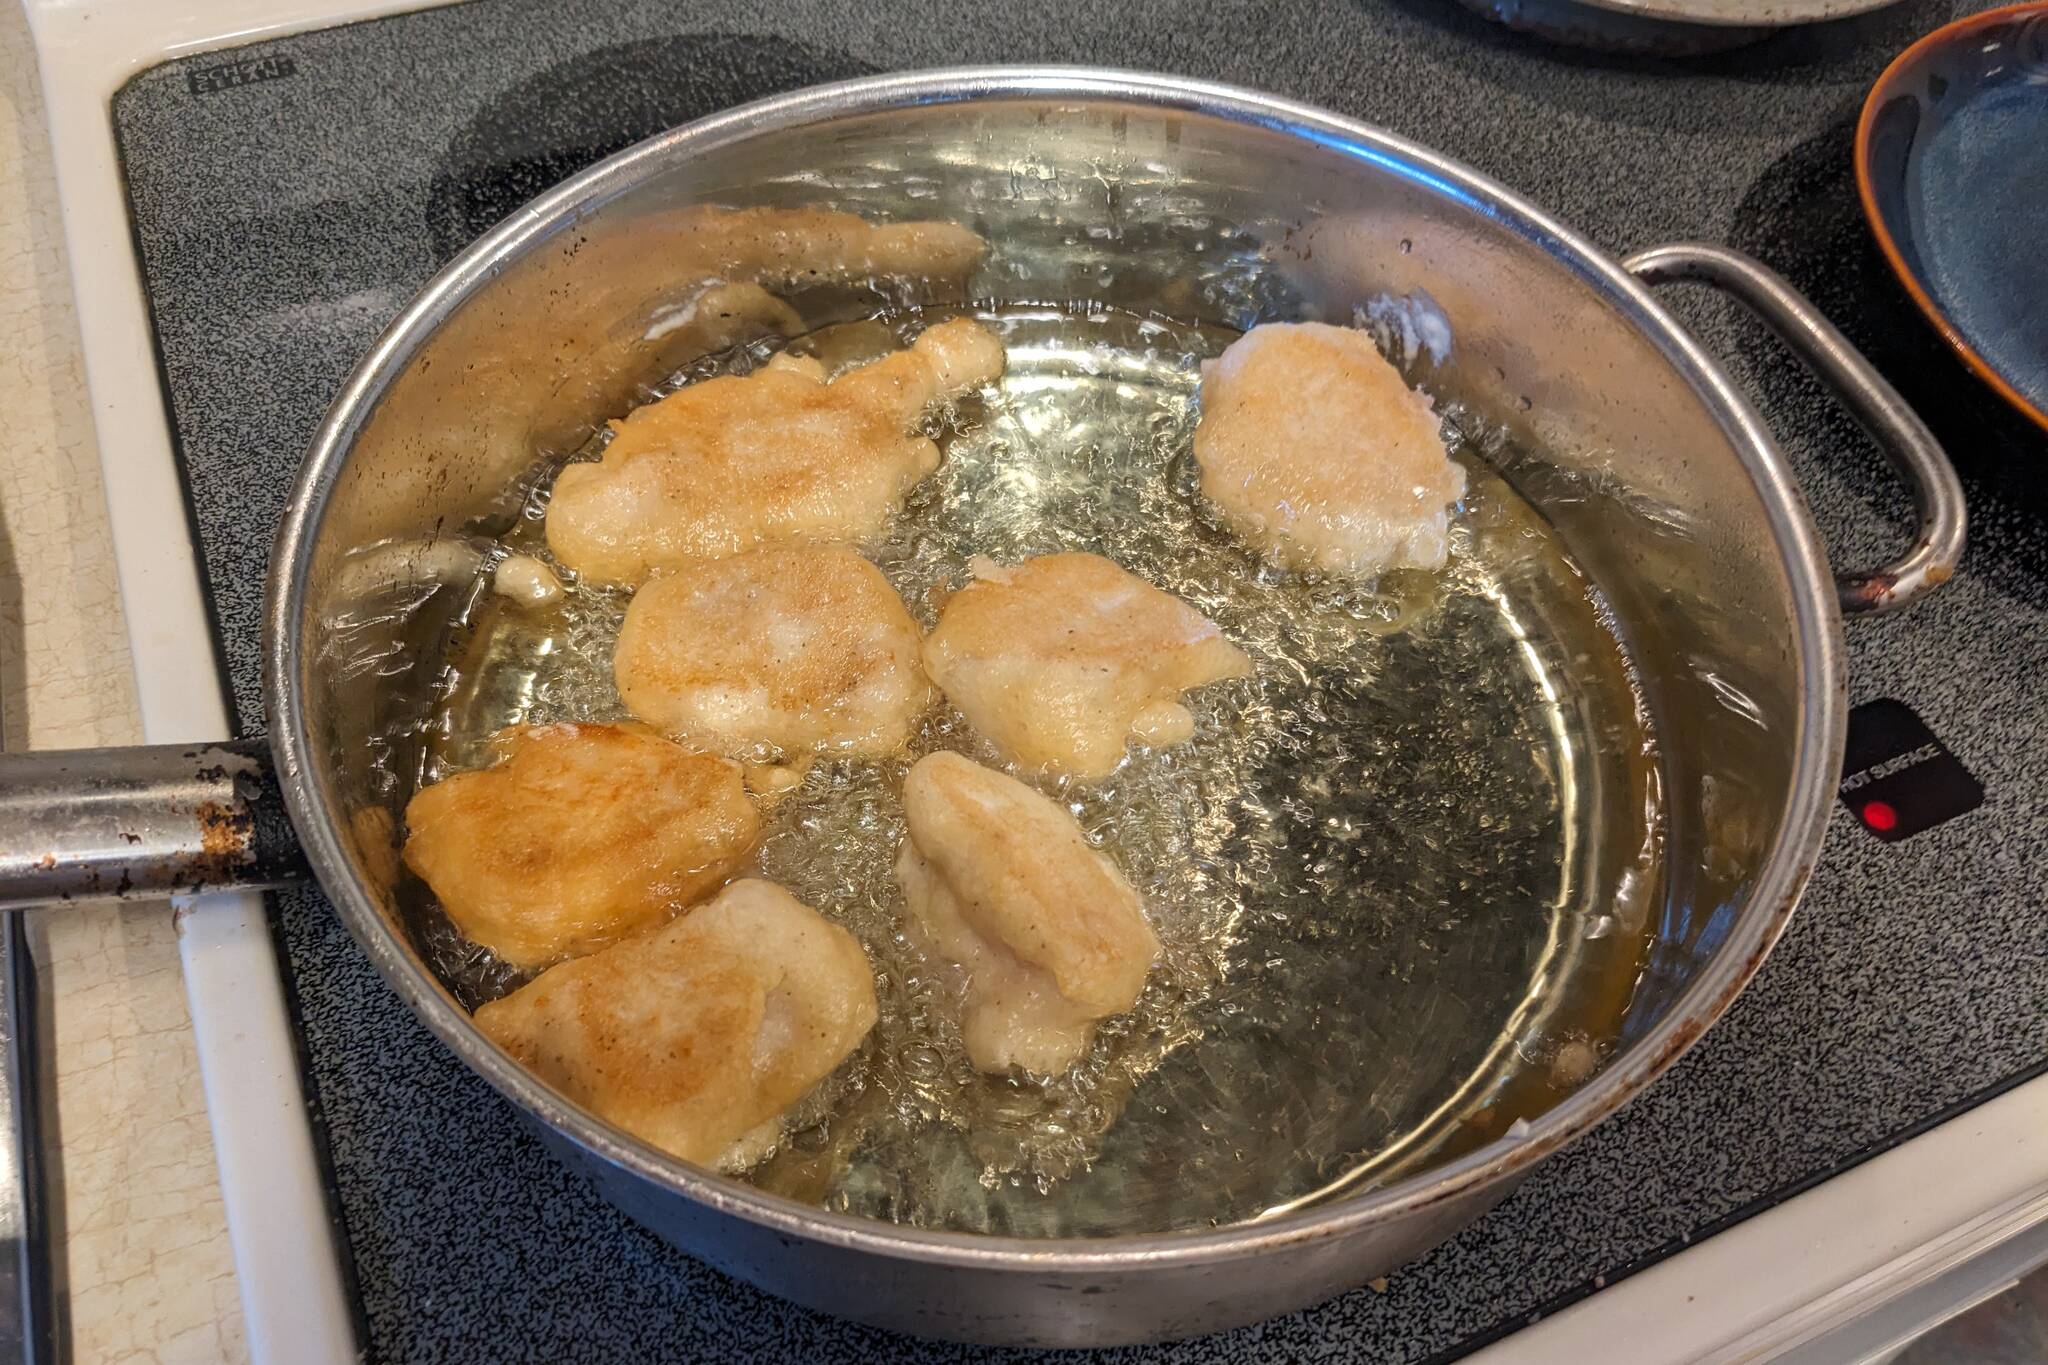 Battered fish fillets frying. (Photo by Patty Schied)